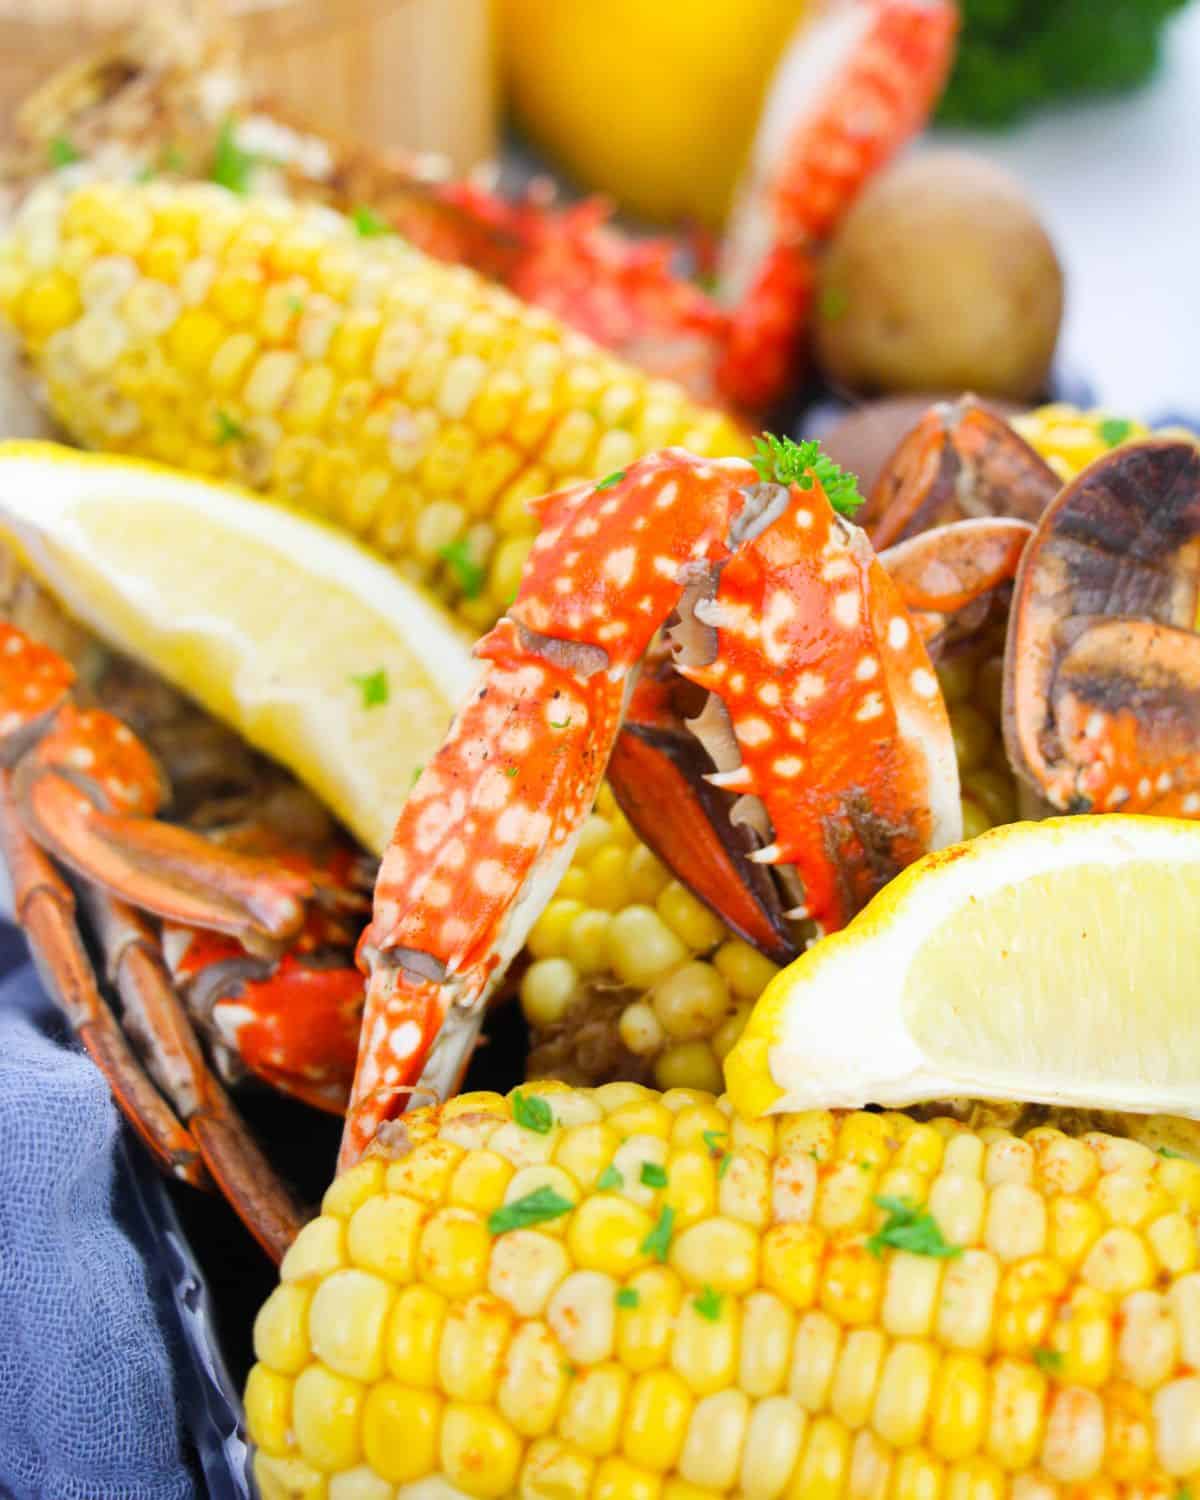 Crabs and corn on the cob with lemon.